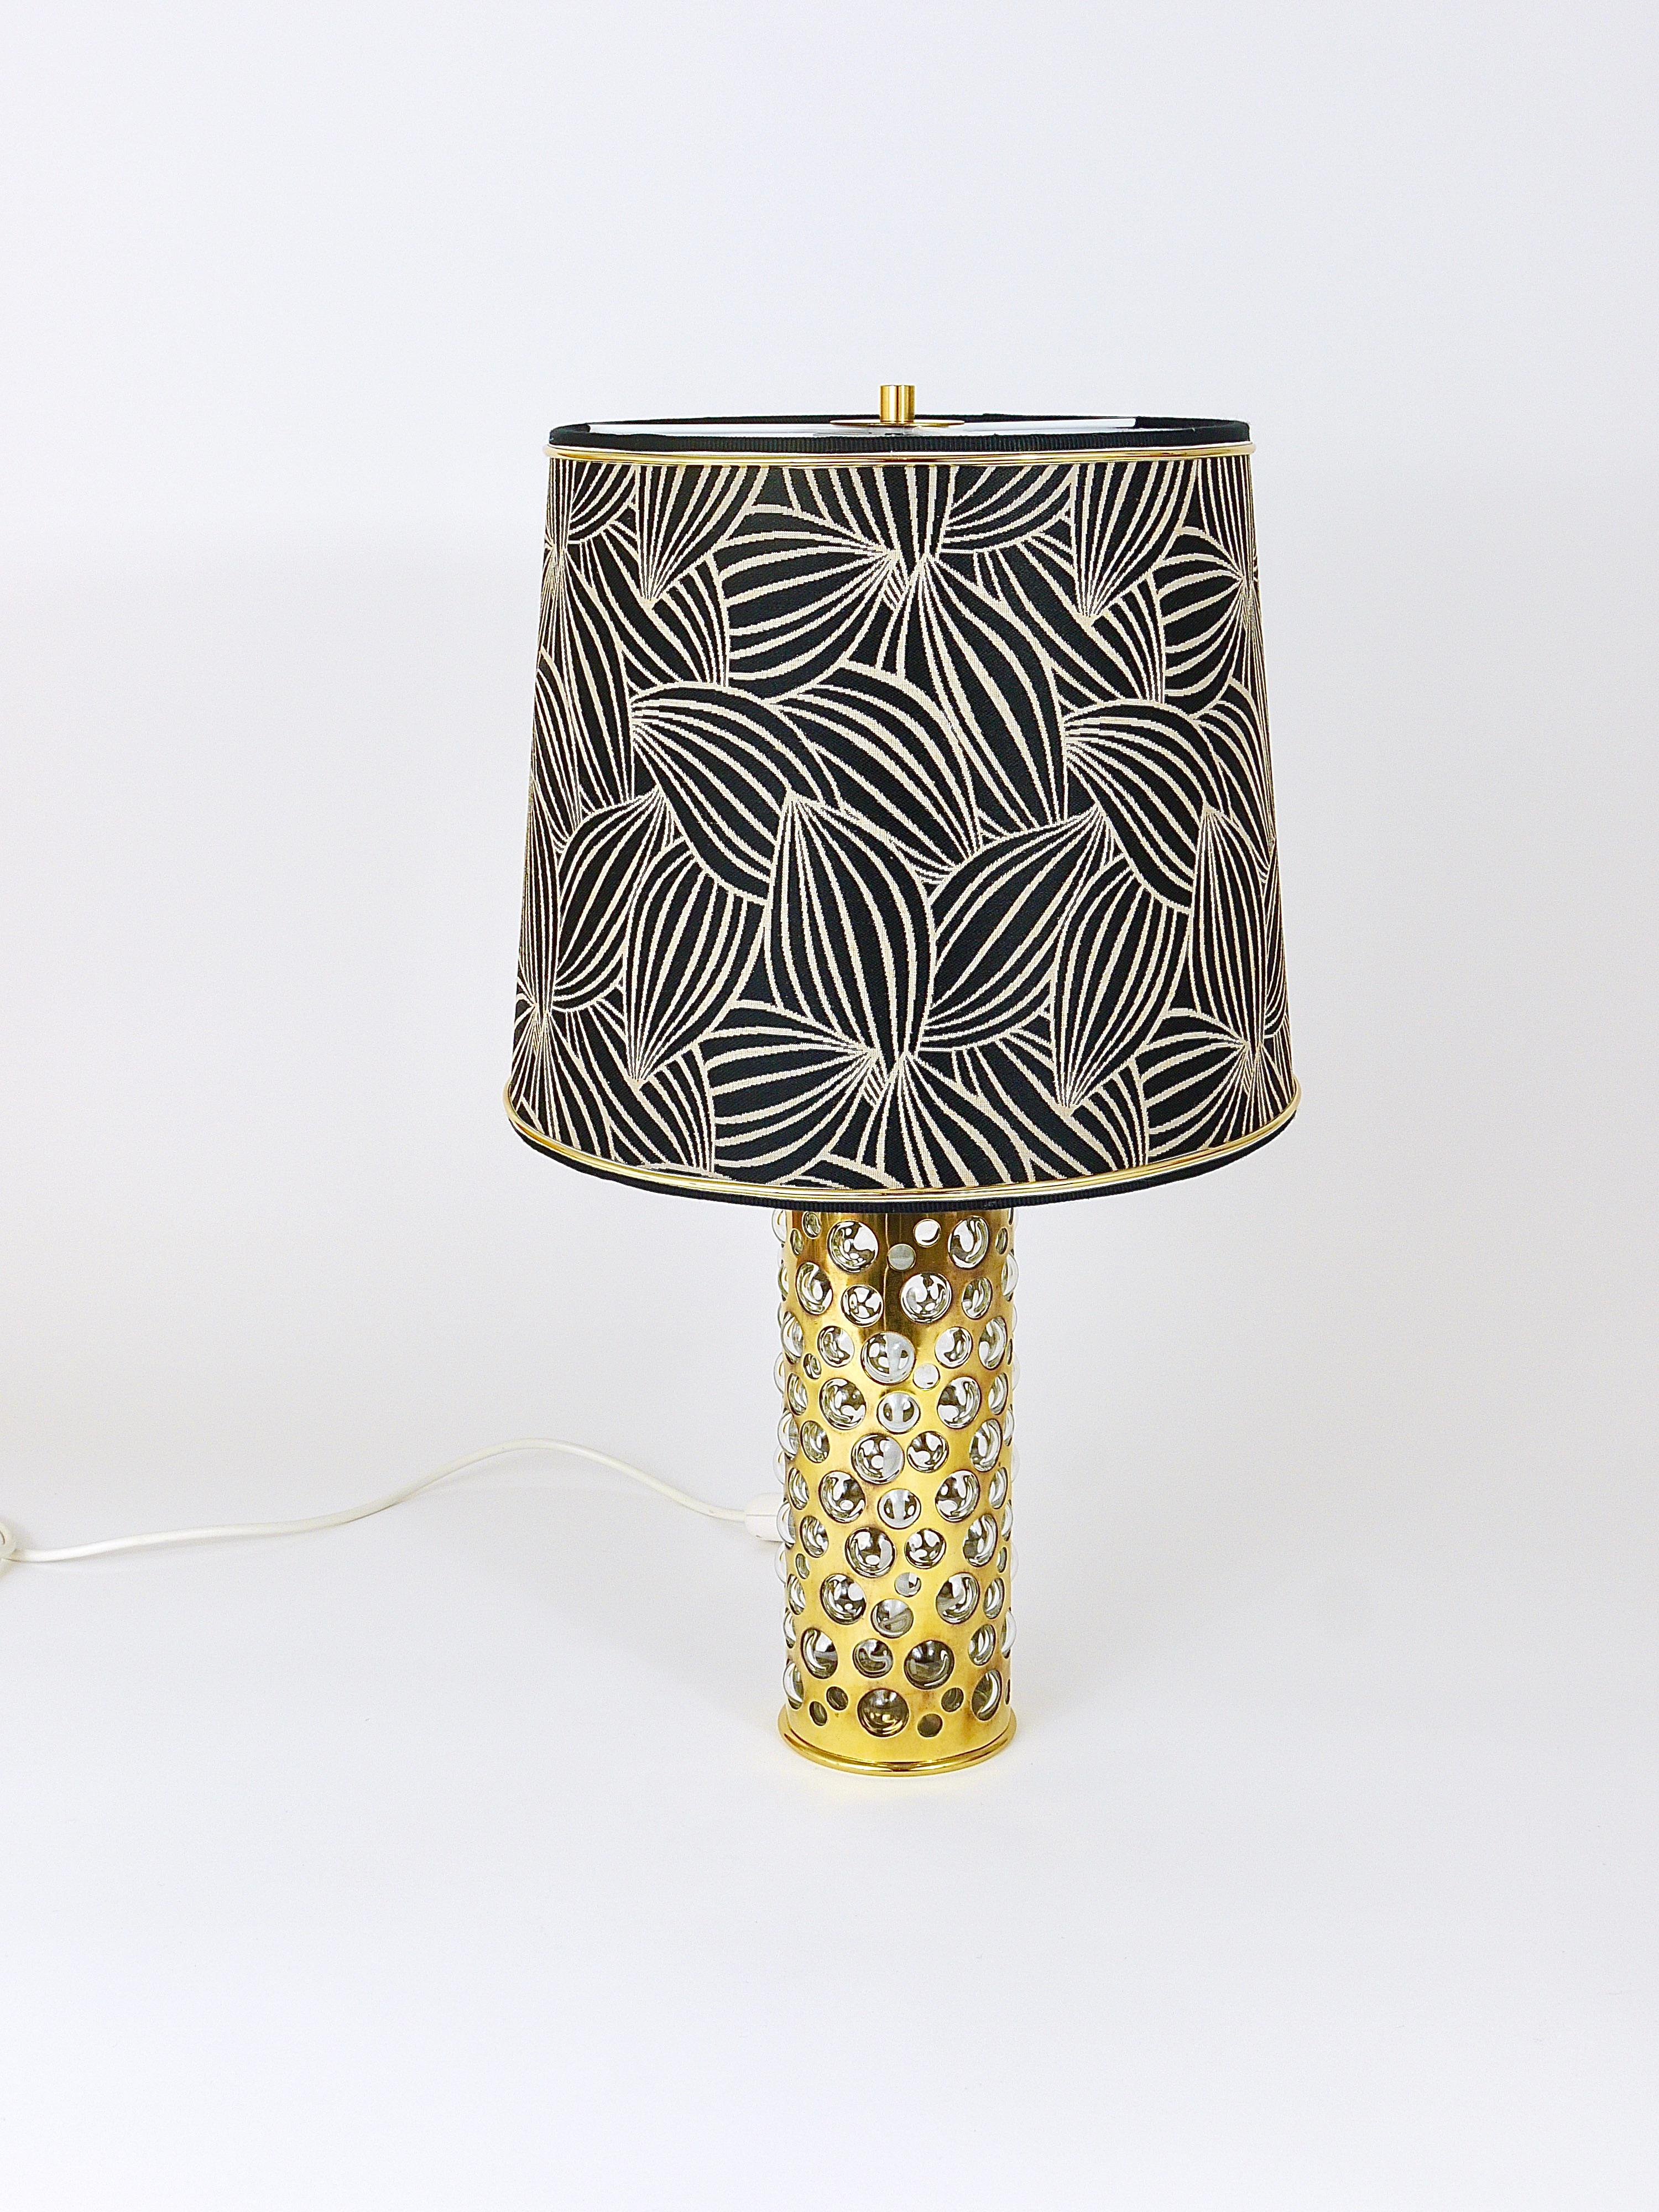 A beautiful modernist table lamp / side lamp from the 1950s, designed and executed by Rupert Nikoll Vienna, Austria. Made of polished brass and mouth blown clear glass with bubbles in various sizes. Comes with a professionally refurbished lampshade,